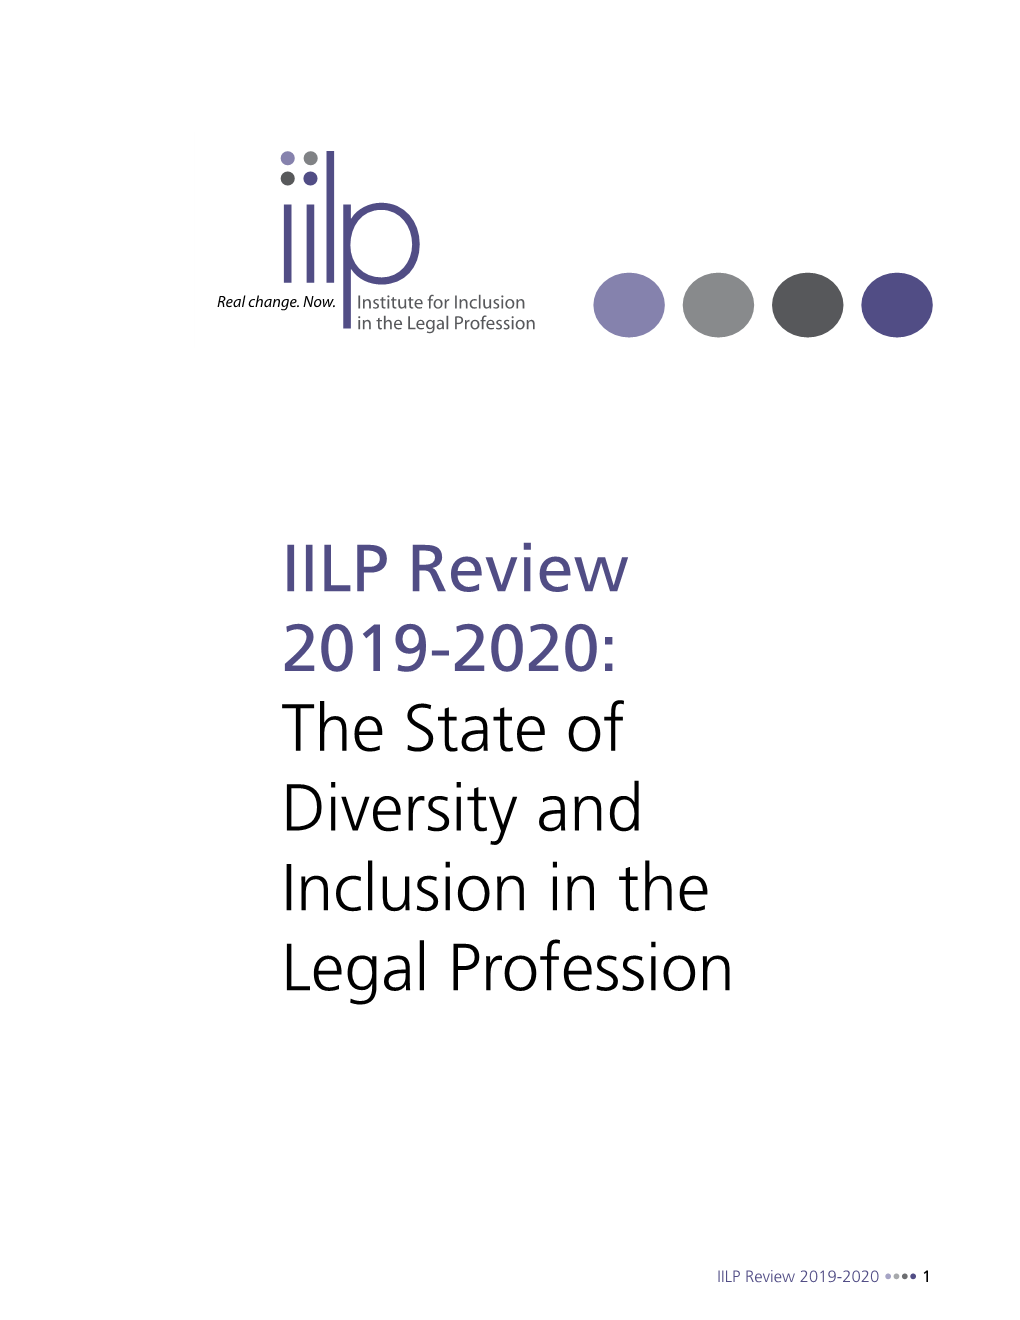 (IILP) Review 2019-2020: the State of Diversity